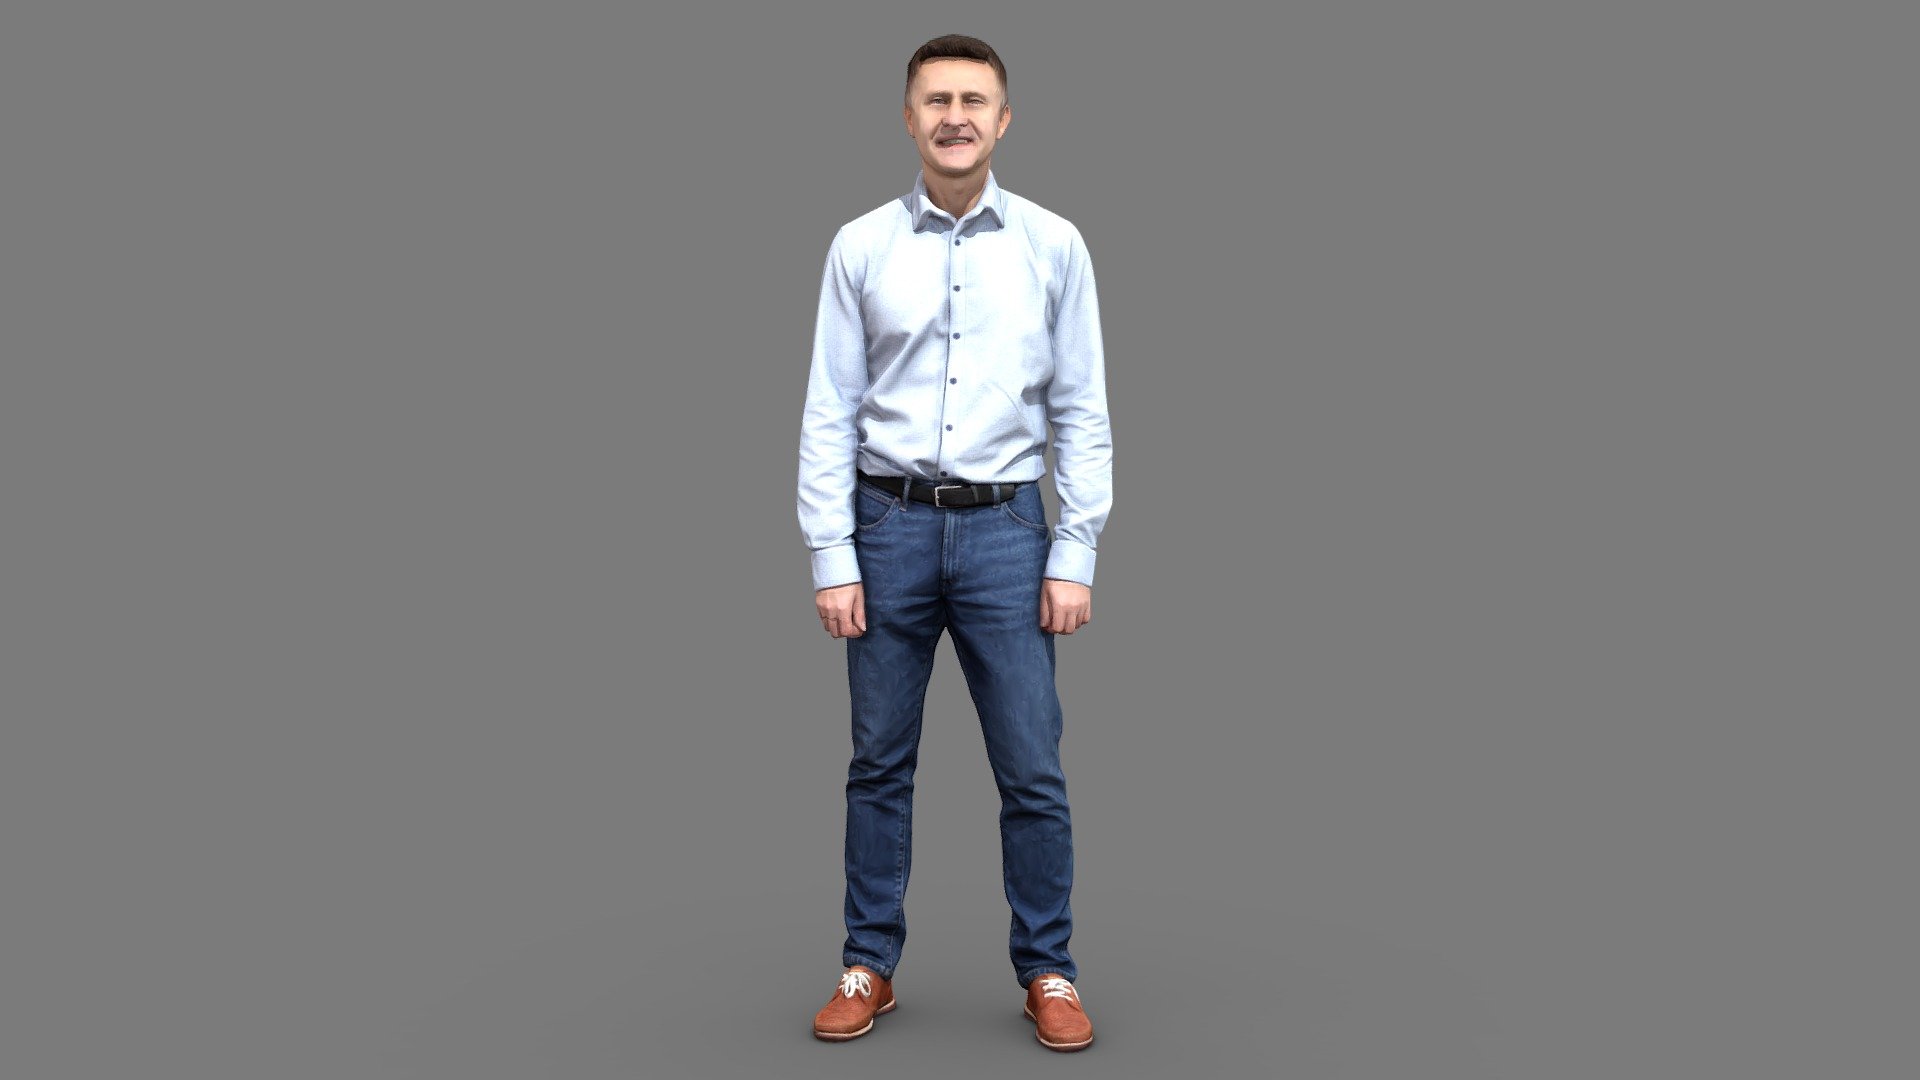 This 3D digital model represents an elegant and sophisticated person, with a professional and classic look. The model has a light blue shirt. The posture is straight and dignified, reflecting a confident and confident attitude. The model has short, well-groomed hair and a serious expression that conveys seriousness and responsibility. This model is perfect to represent an executive, a lawyer or any other person who wants to project a formal and imposing image.
Can be printed in any method you want, can also be used for 3D animation 3d model